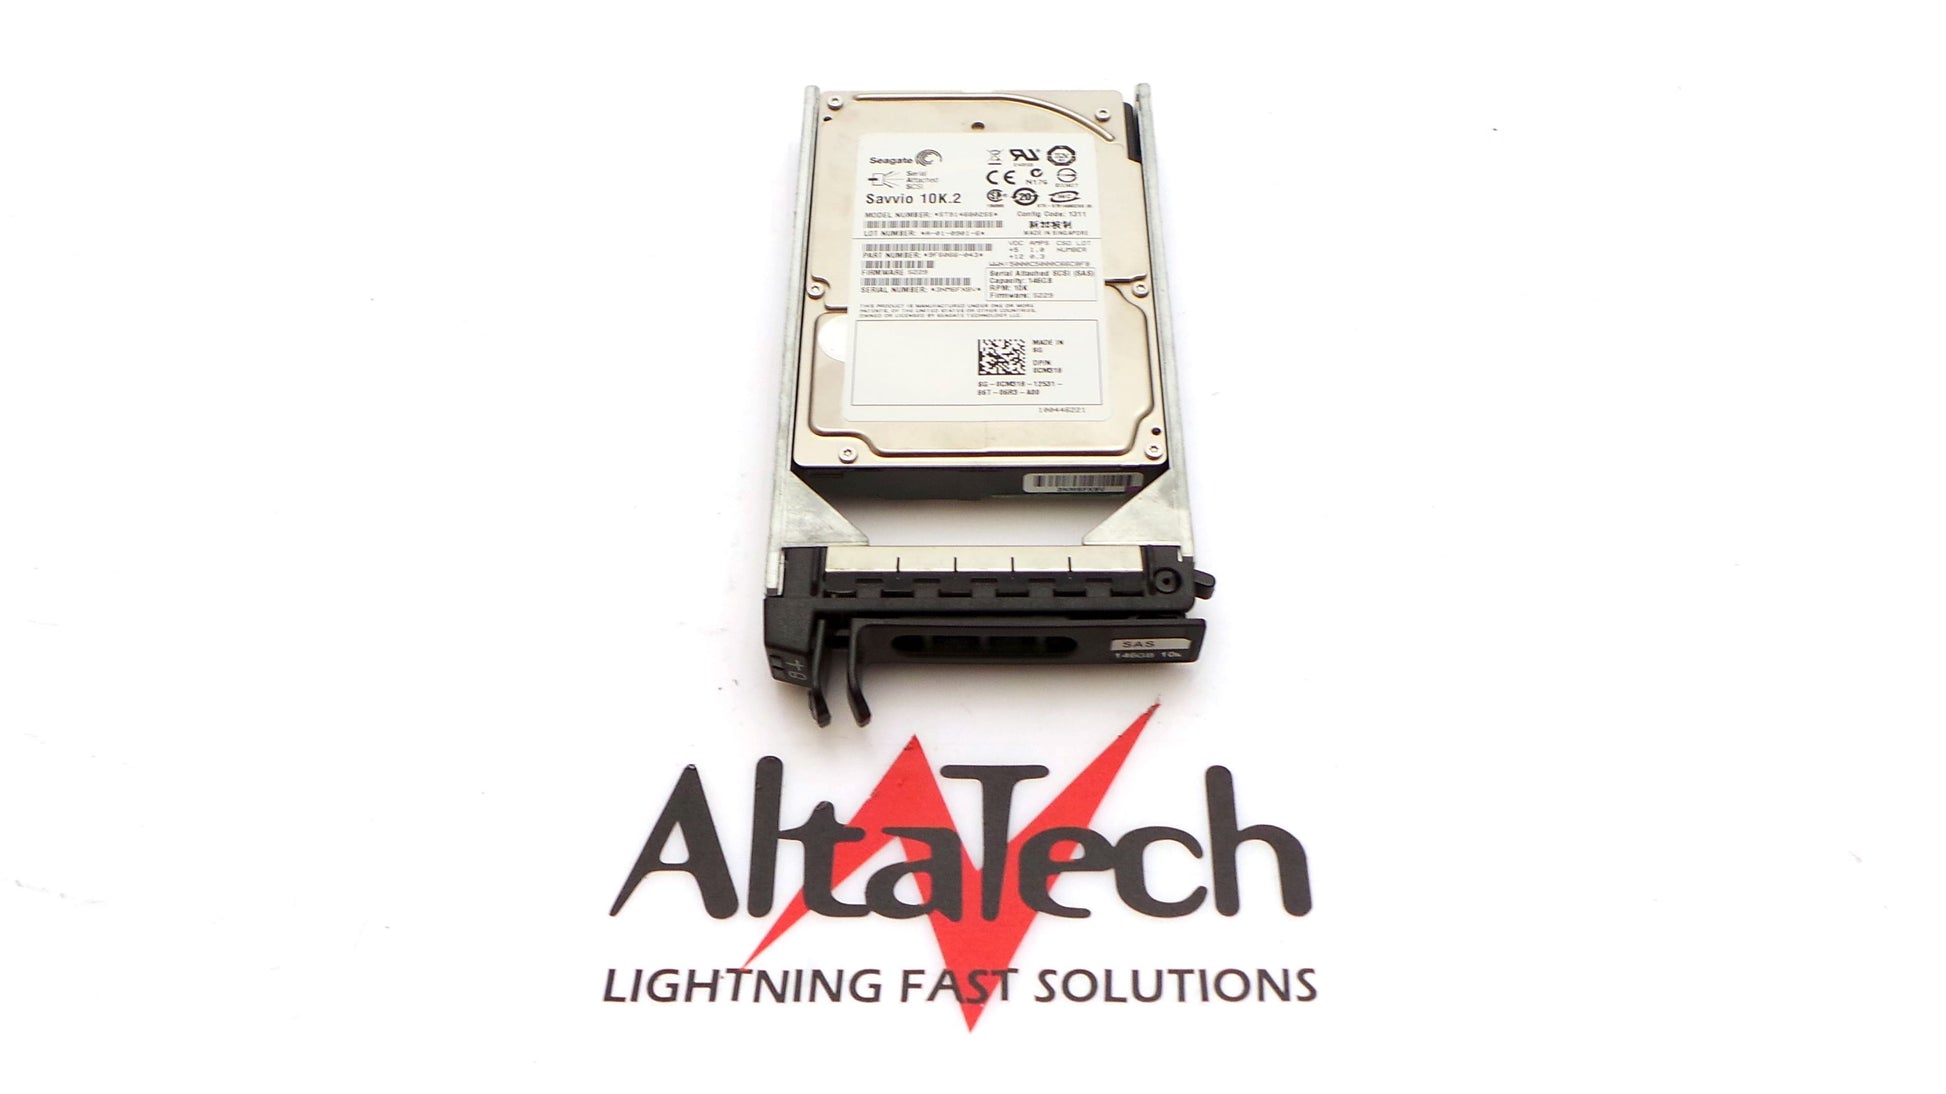 Dell CM318 146GB SAS 2.5" 3Gbps Hard Disk Drive, Used